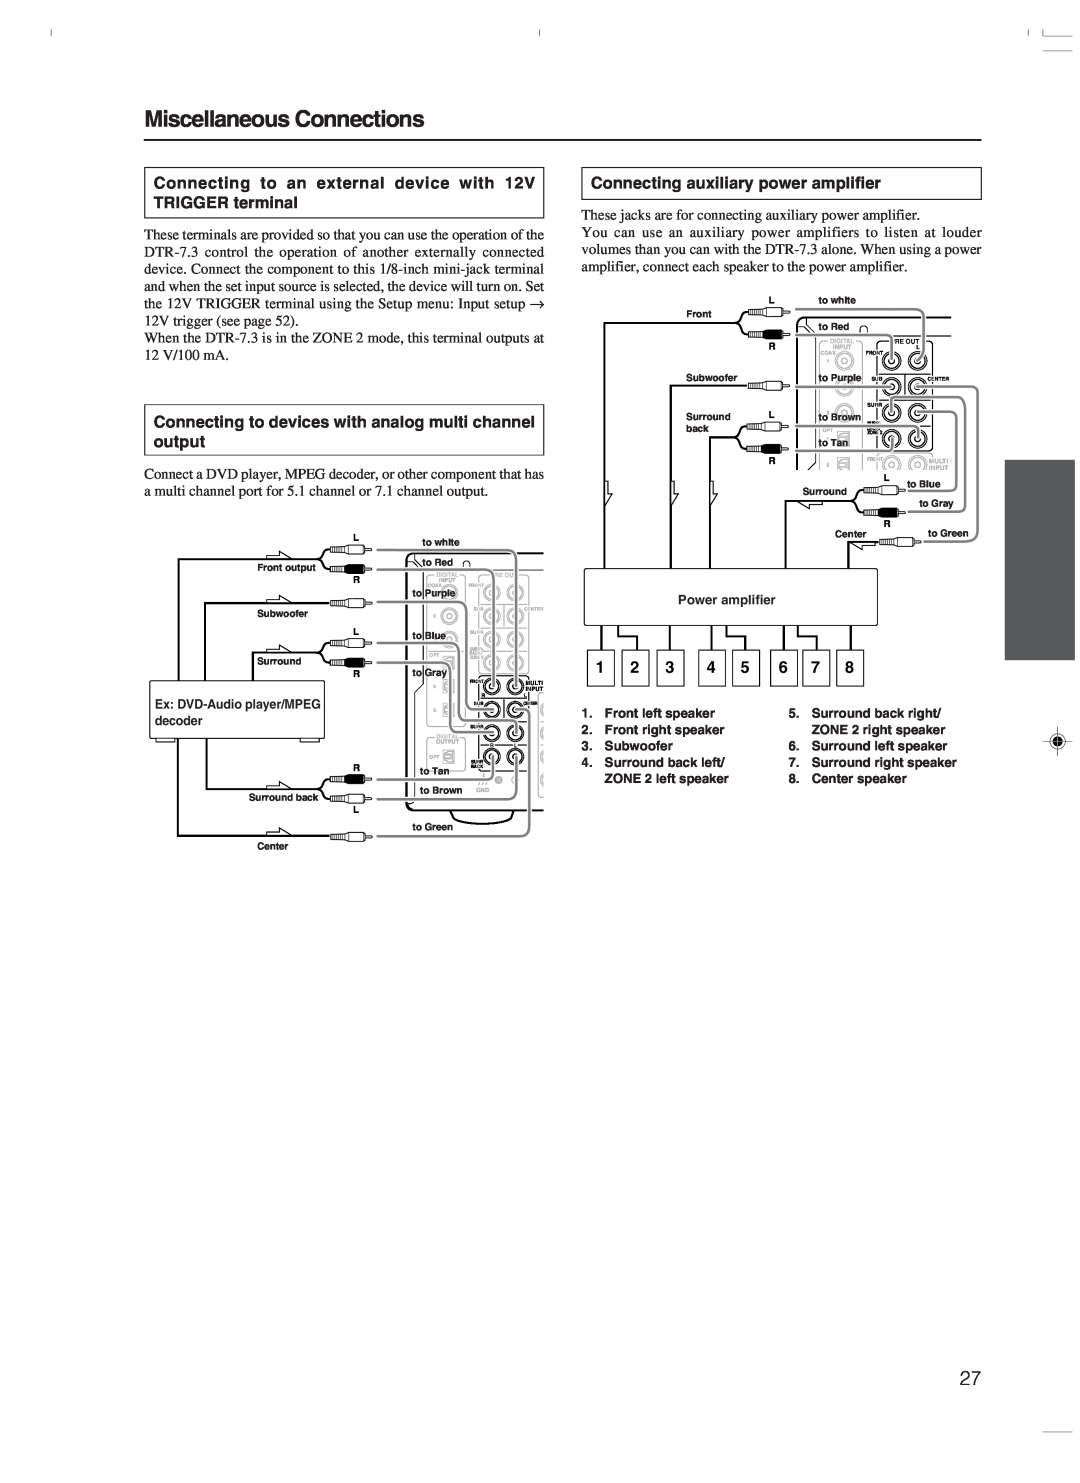 Integra DTR-7.3 instruction manual Miscellaneous Connections, Connecting auxiliary power amplifier, 1 2 3 4 